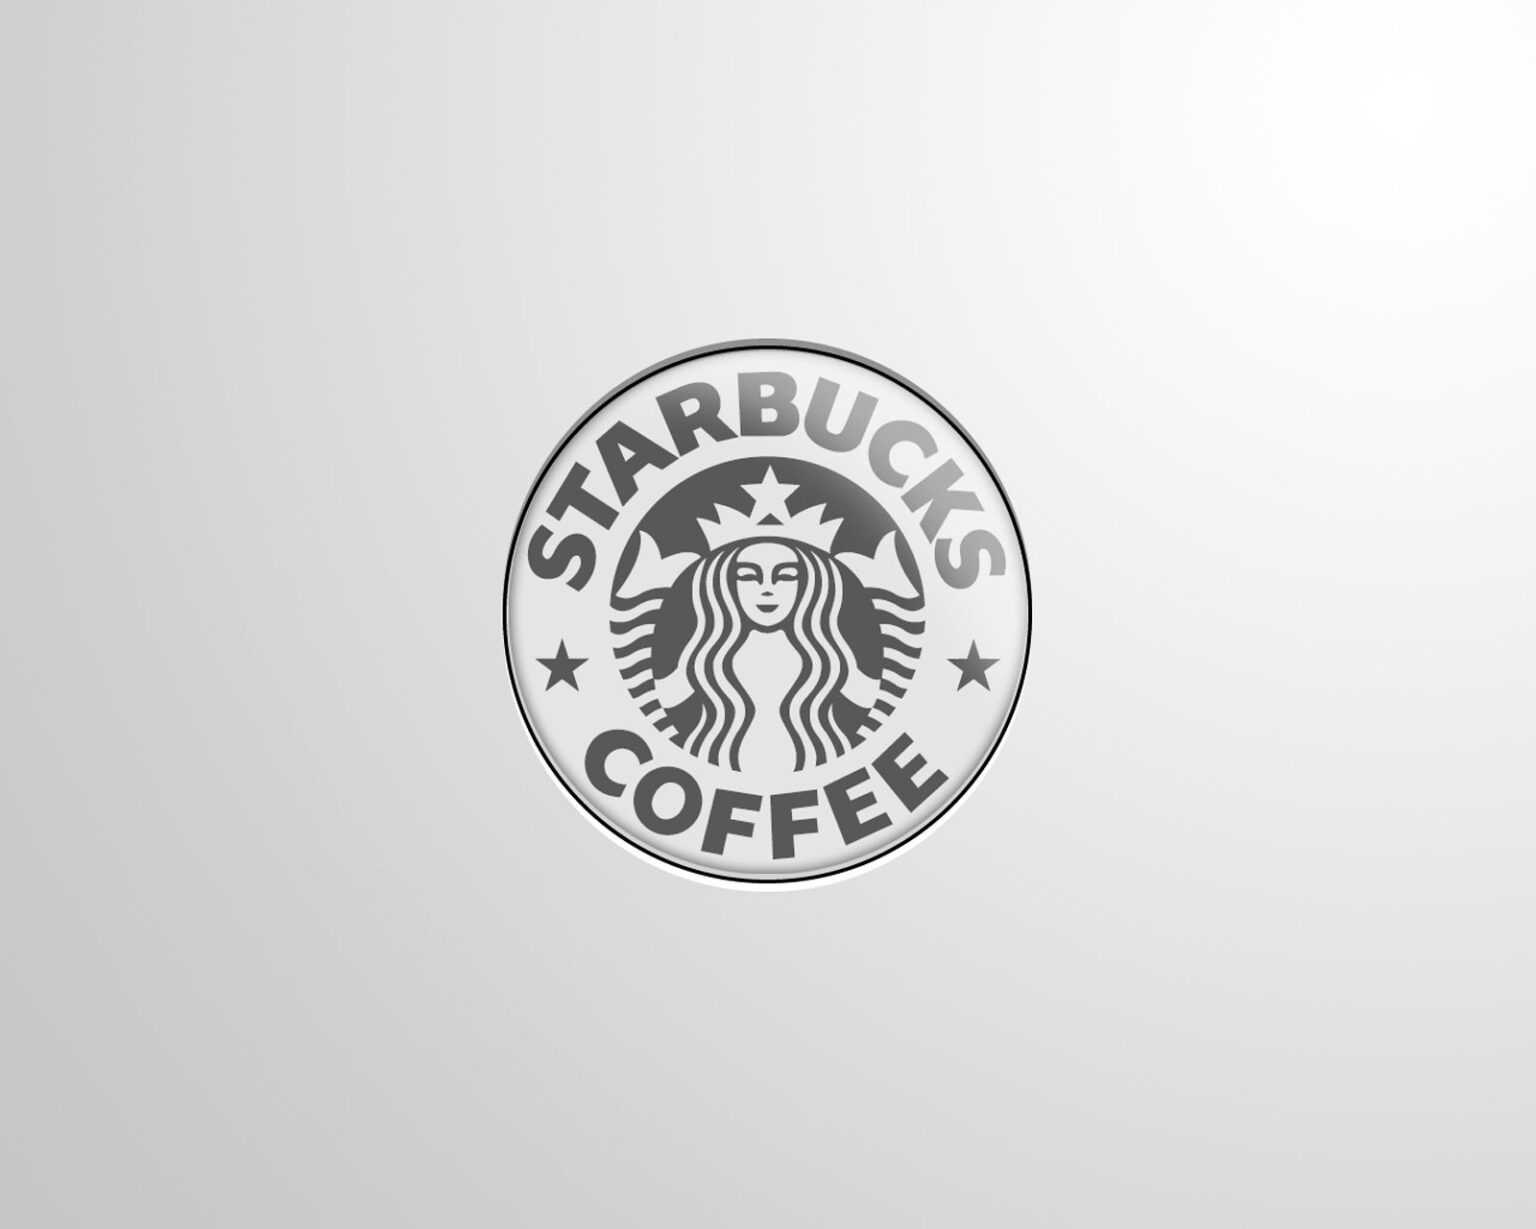 starbucks-backgrounds-for-powerpoint-templates-ppt-backgrounds